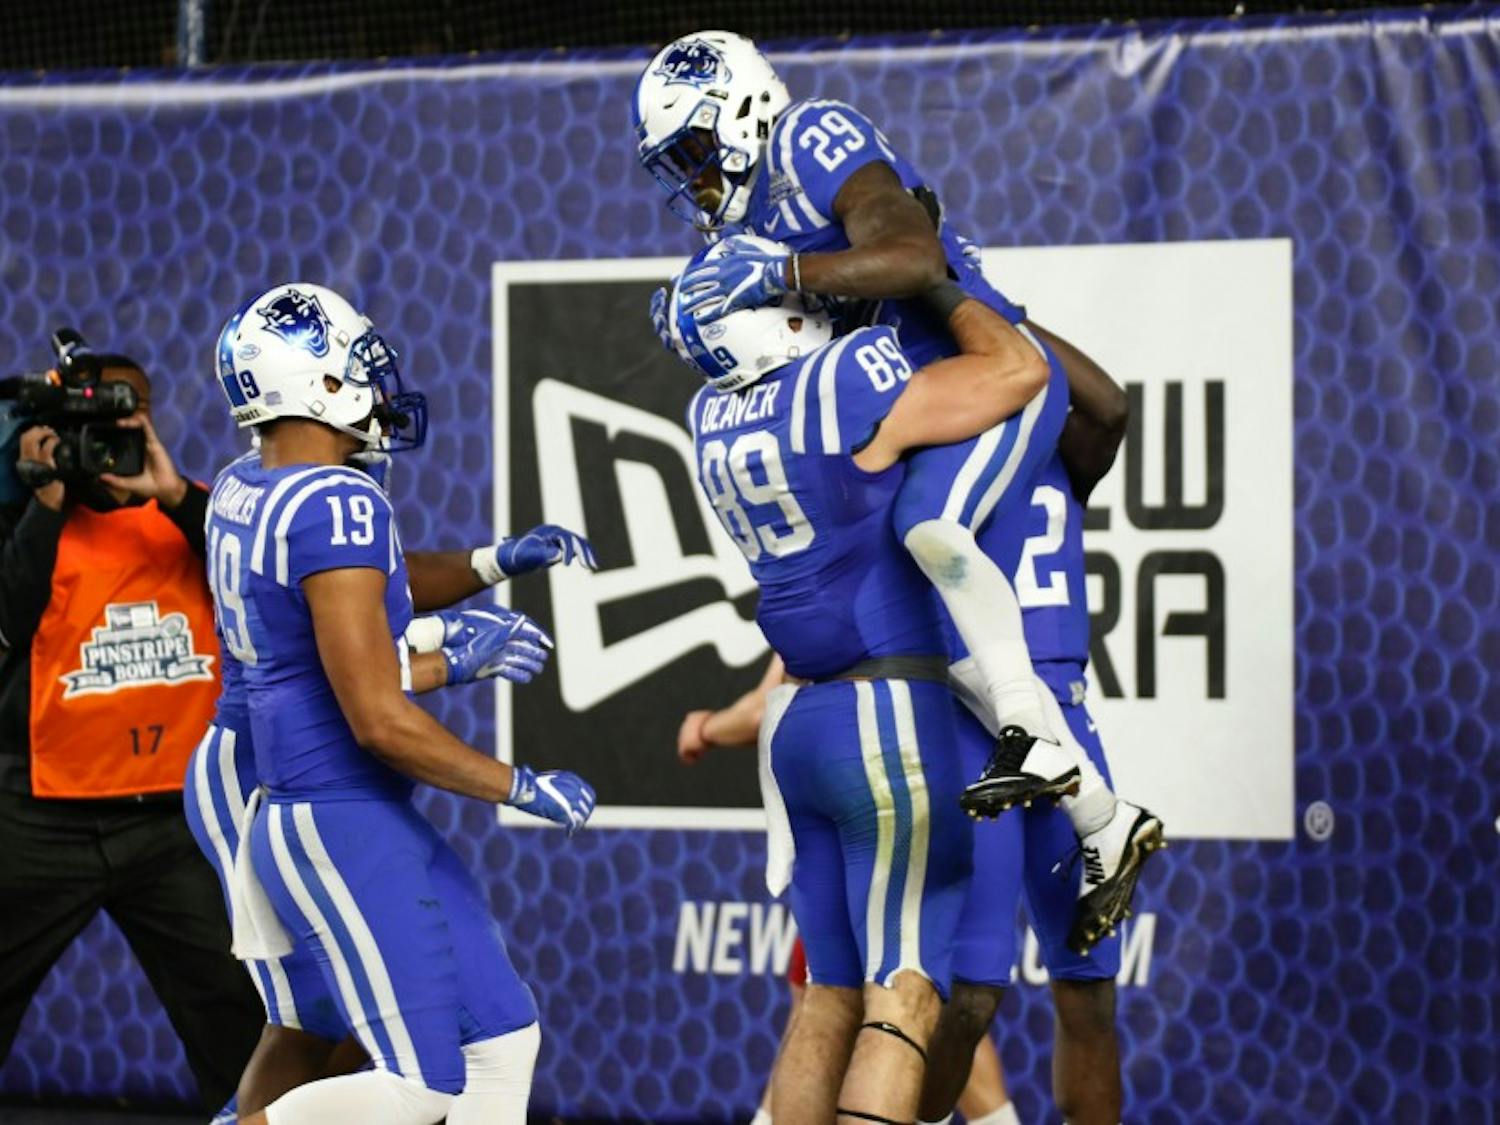 Duke's veteran players got to celebrate the end of their careers in style Saturday&mdash;a bowl win in the Big Apple, after three straight years of fourth-quarter disappointments.